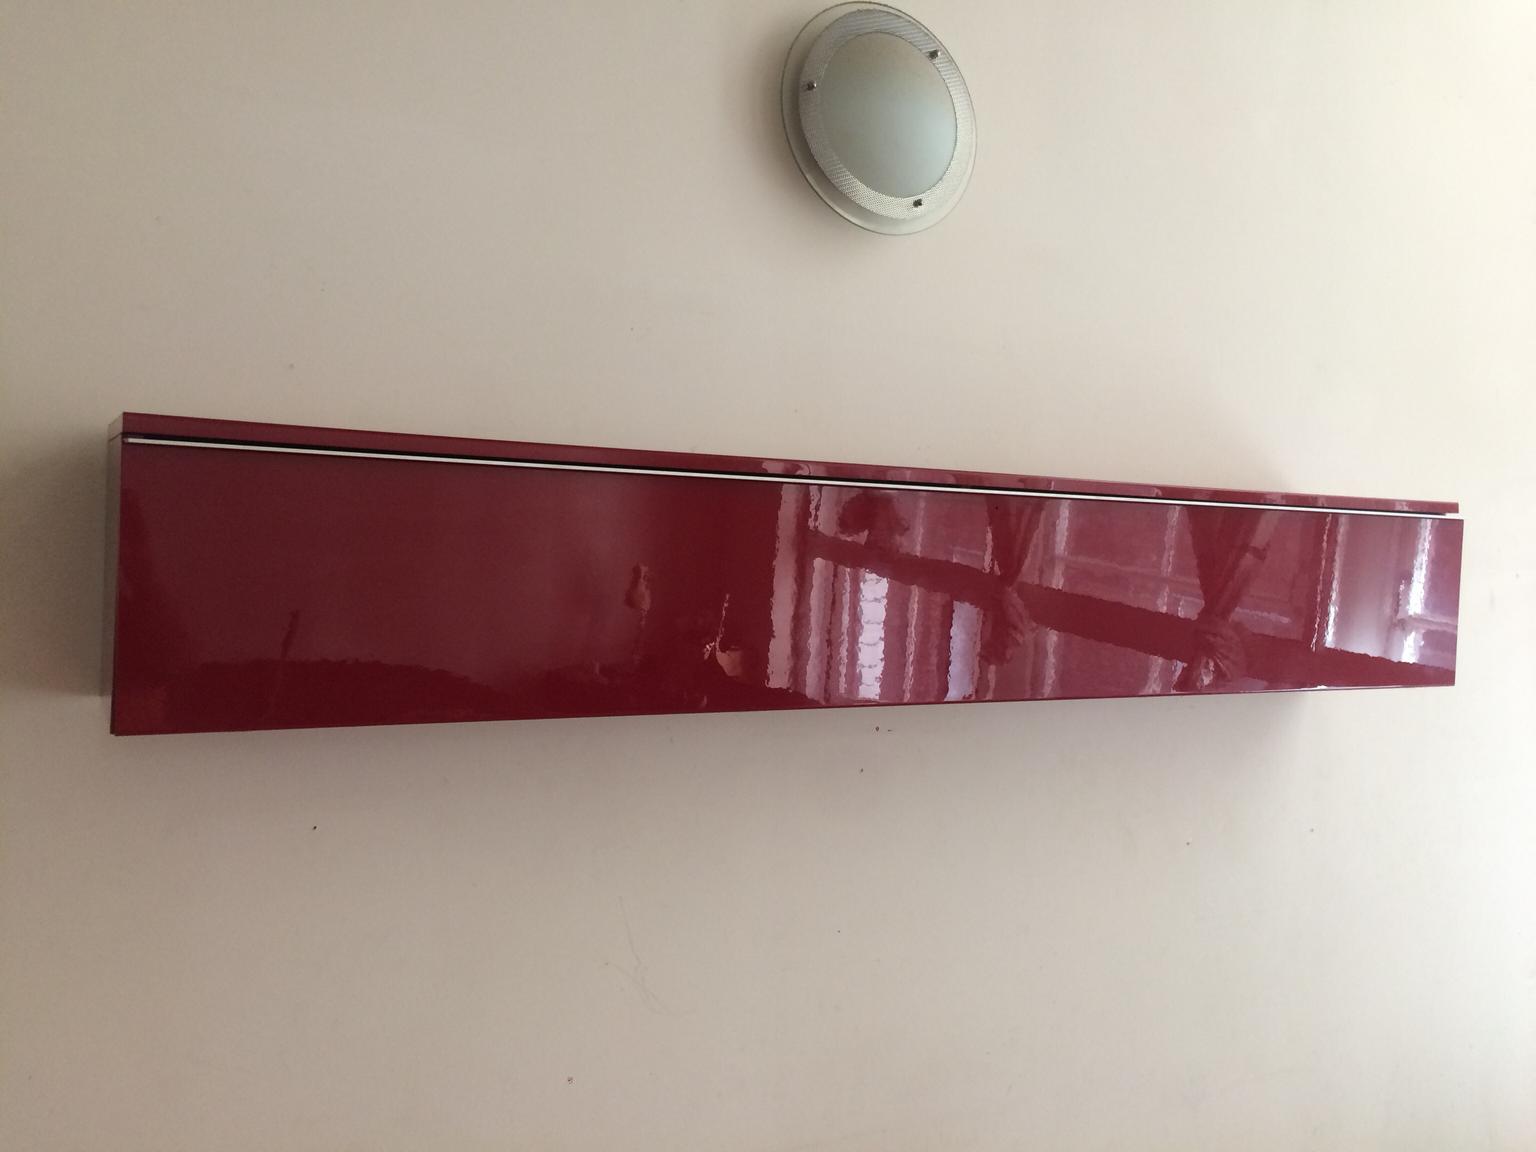 Ikea Glossy Red Tv Stand And Overhead Cabinet In M1 Manchester Fur